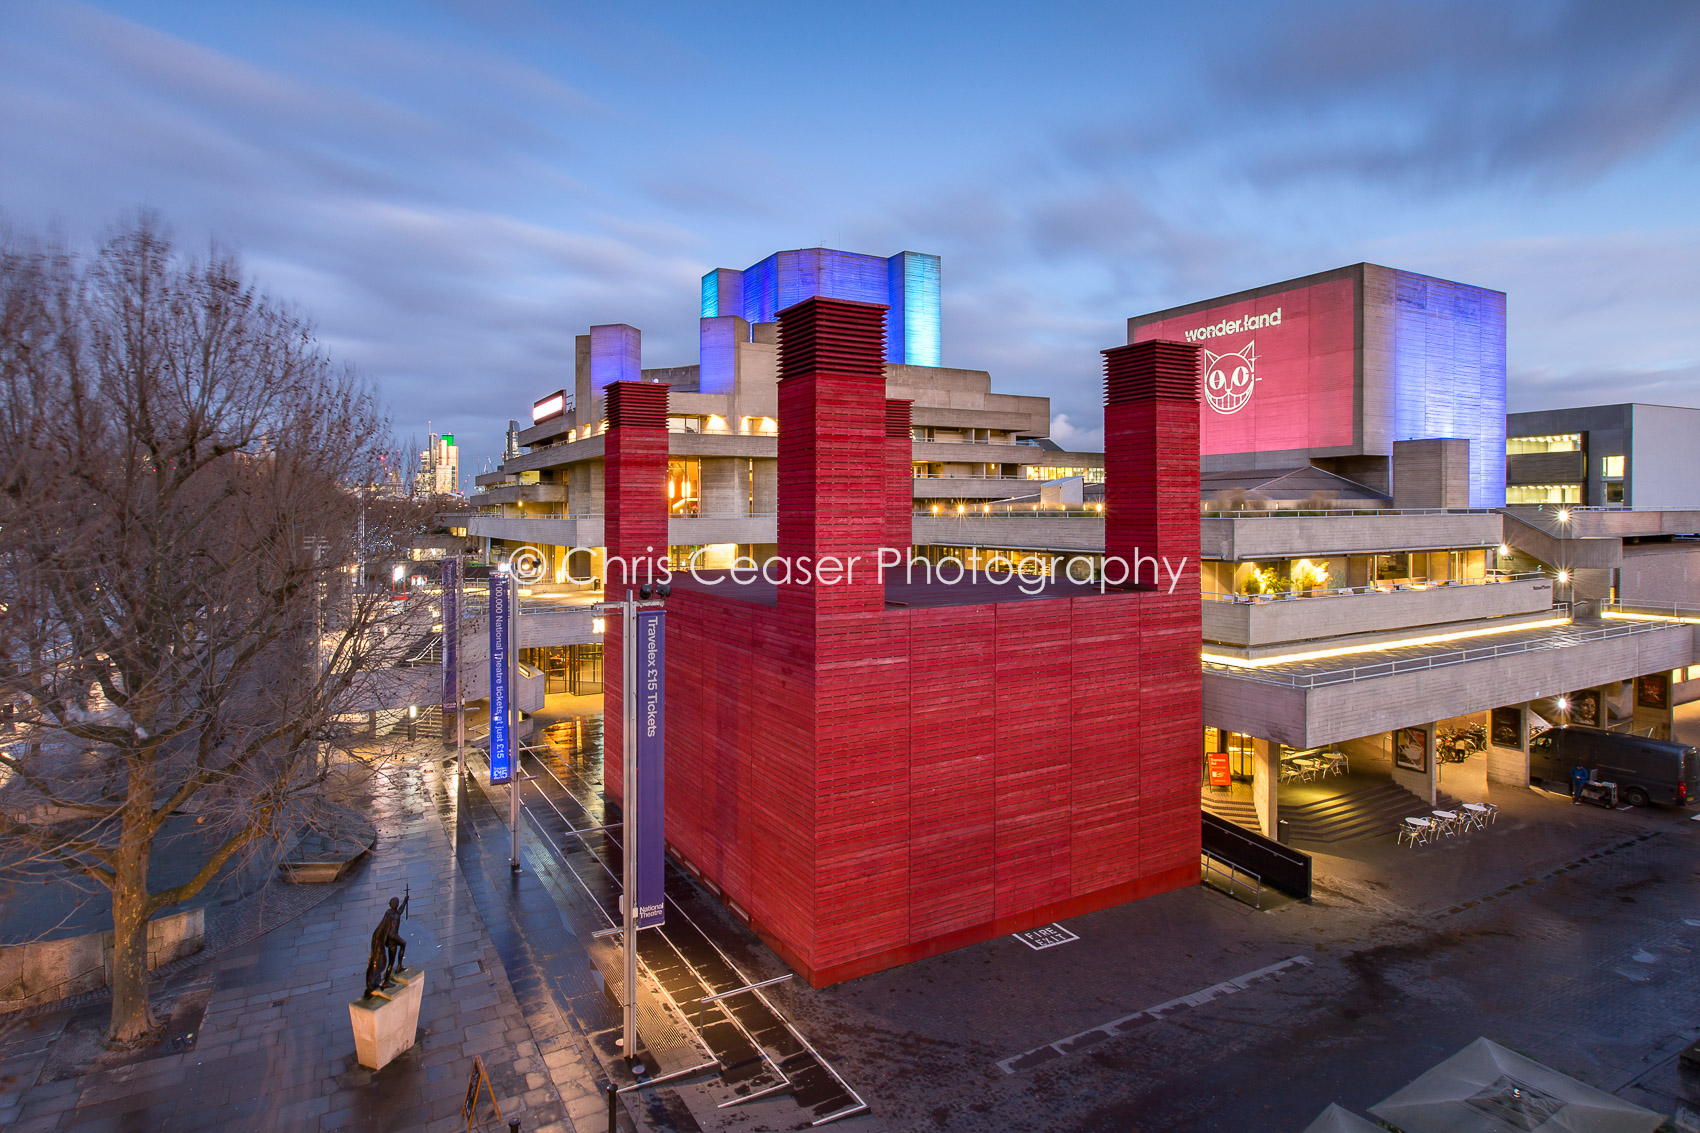 The National Theatre, London Chris Ceaser Photography